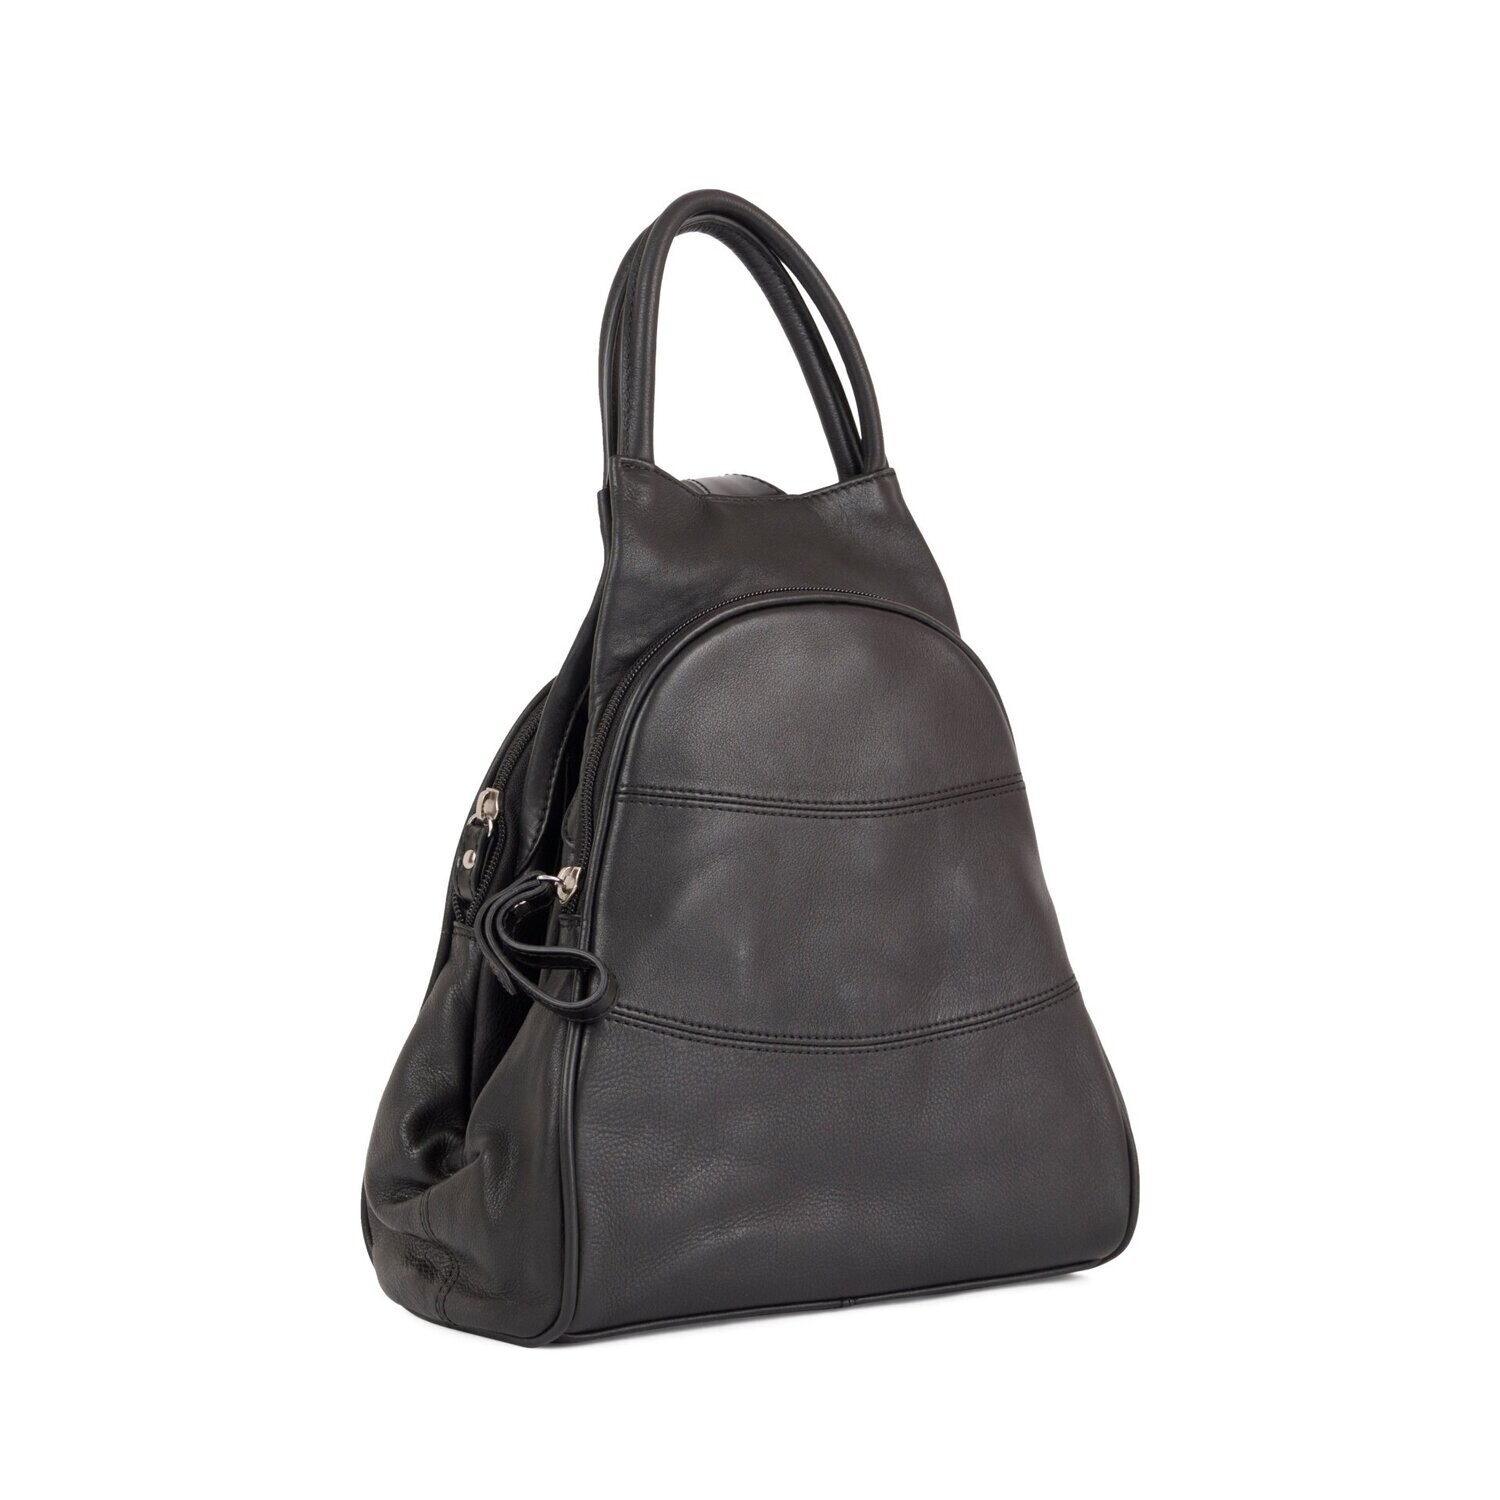 Gianni Conti Everyday Backpack